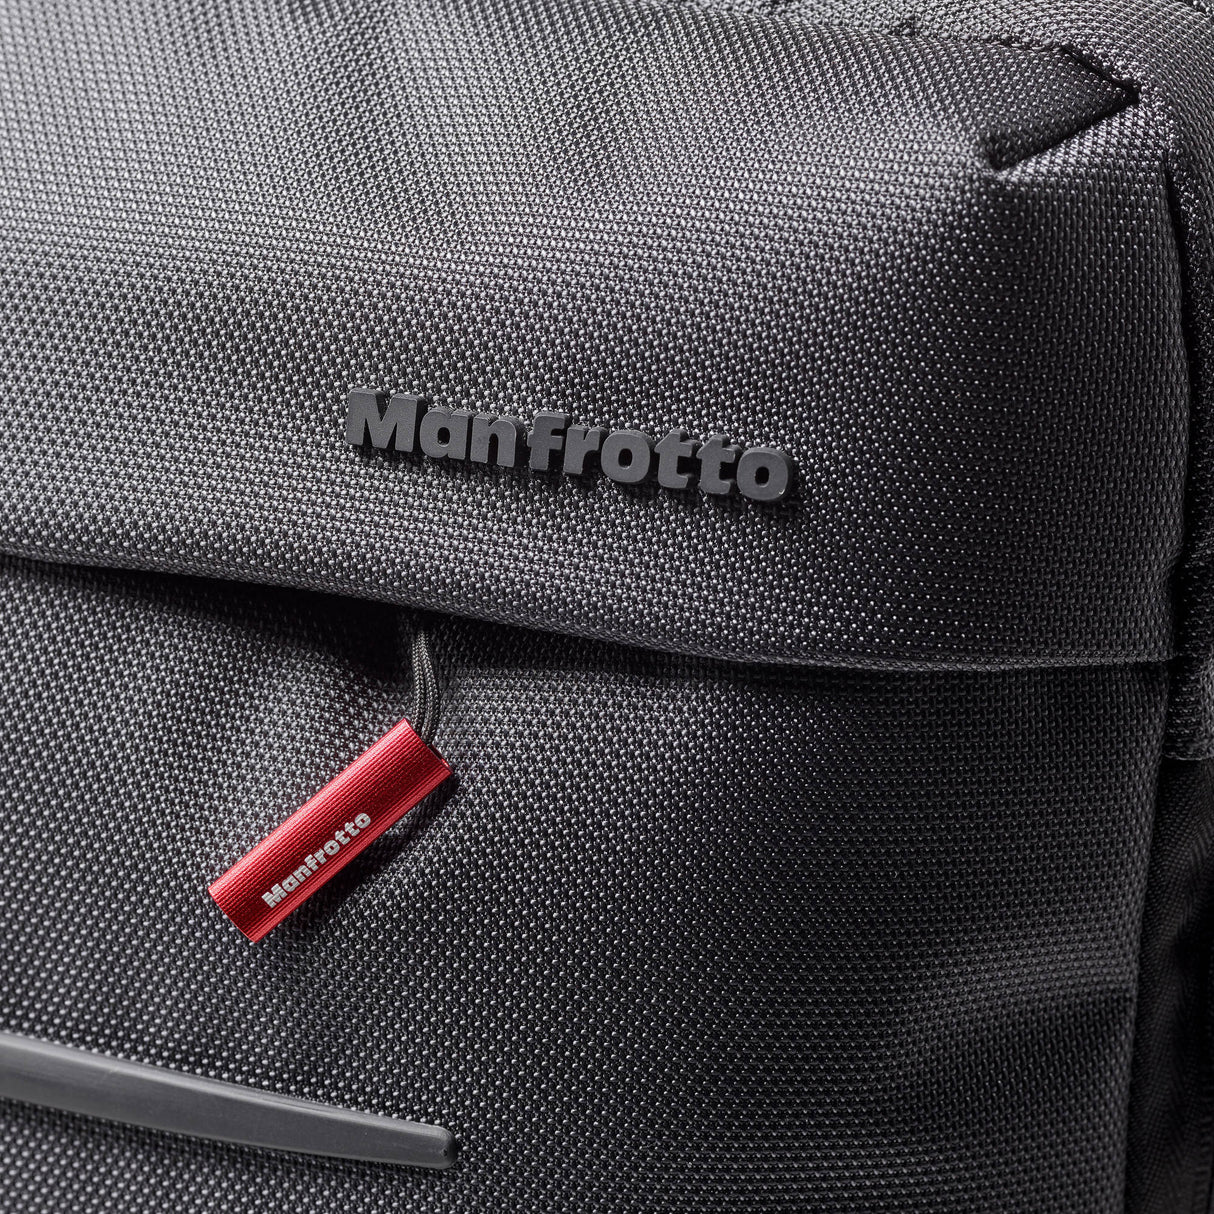 Manfrotto Manhattan Mover-50 Camera Backpack (Gray)